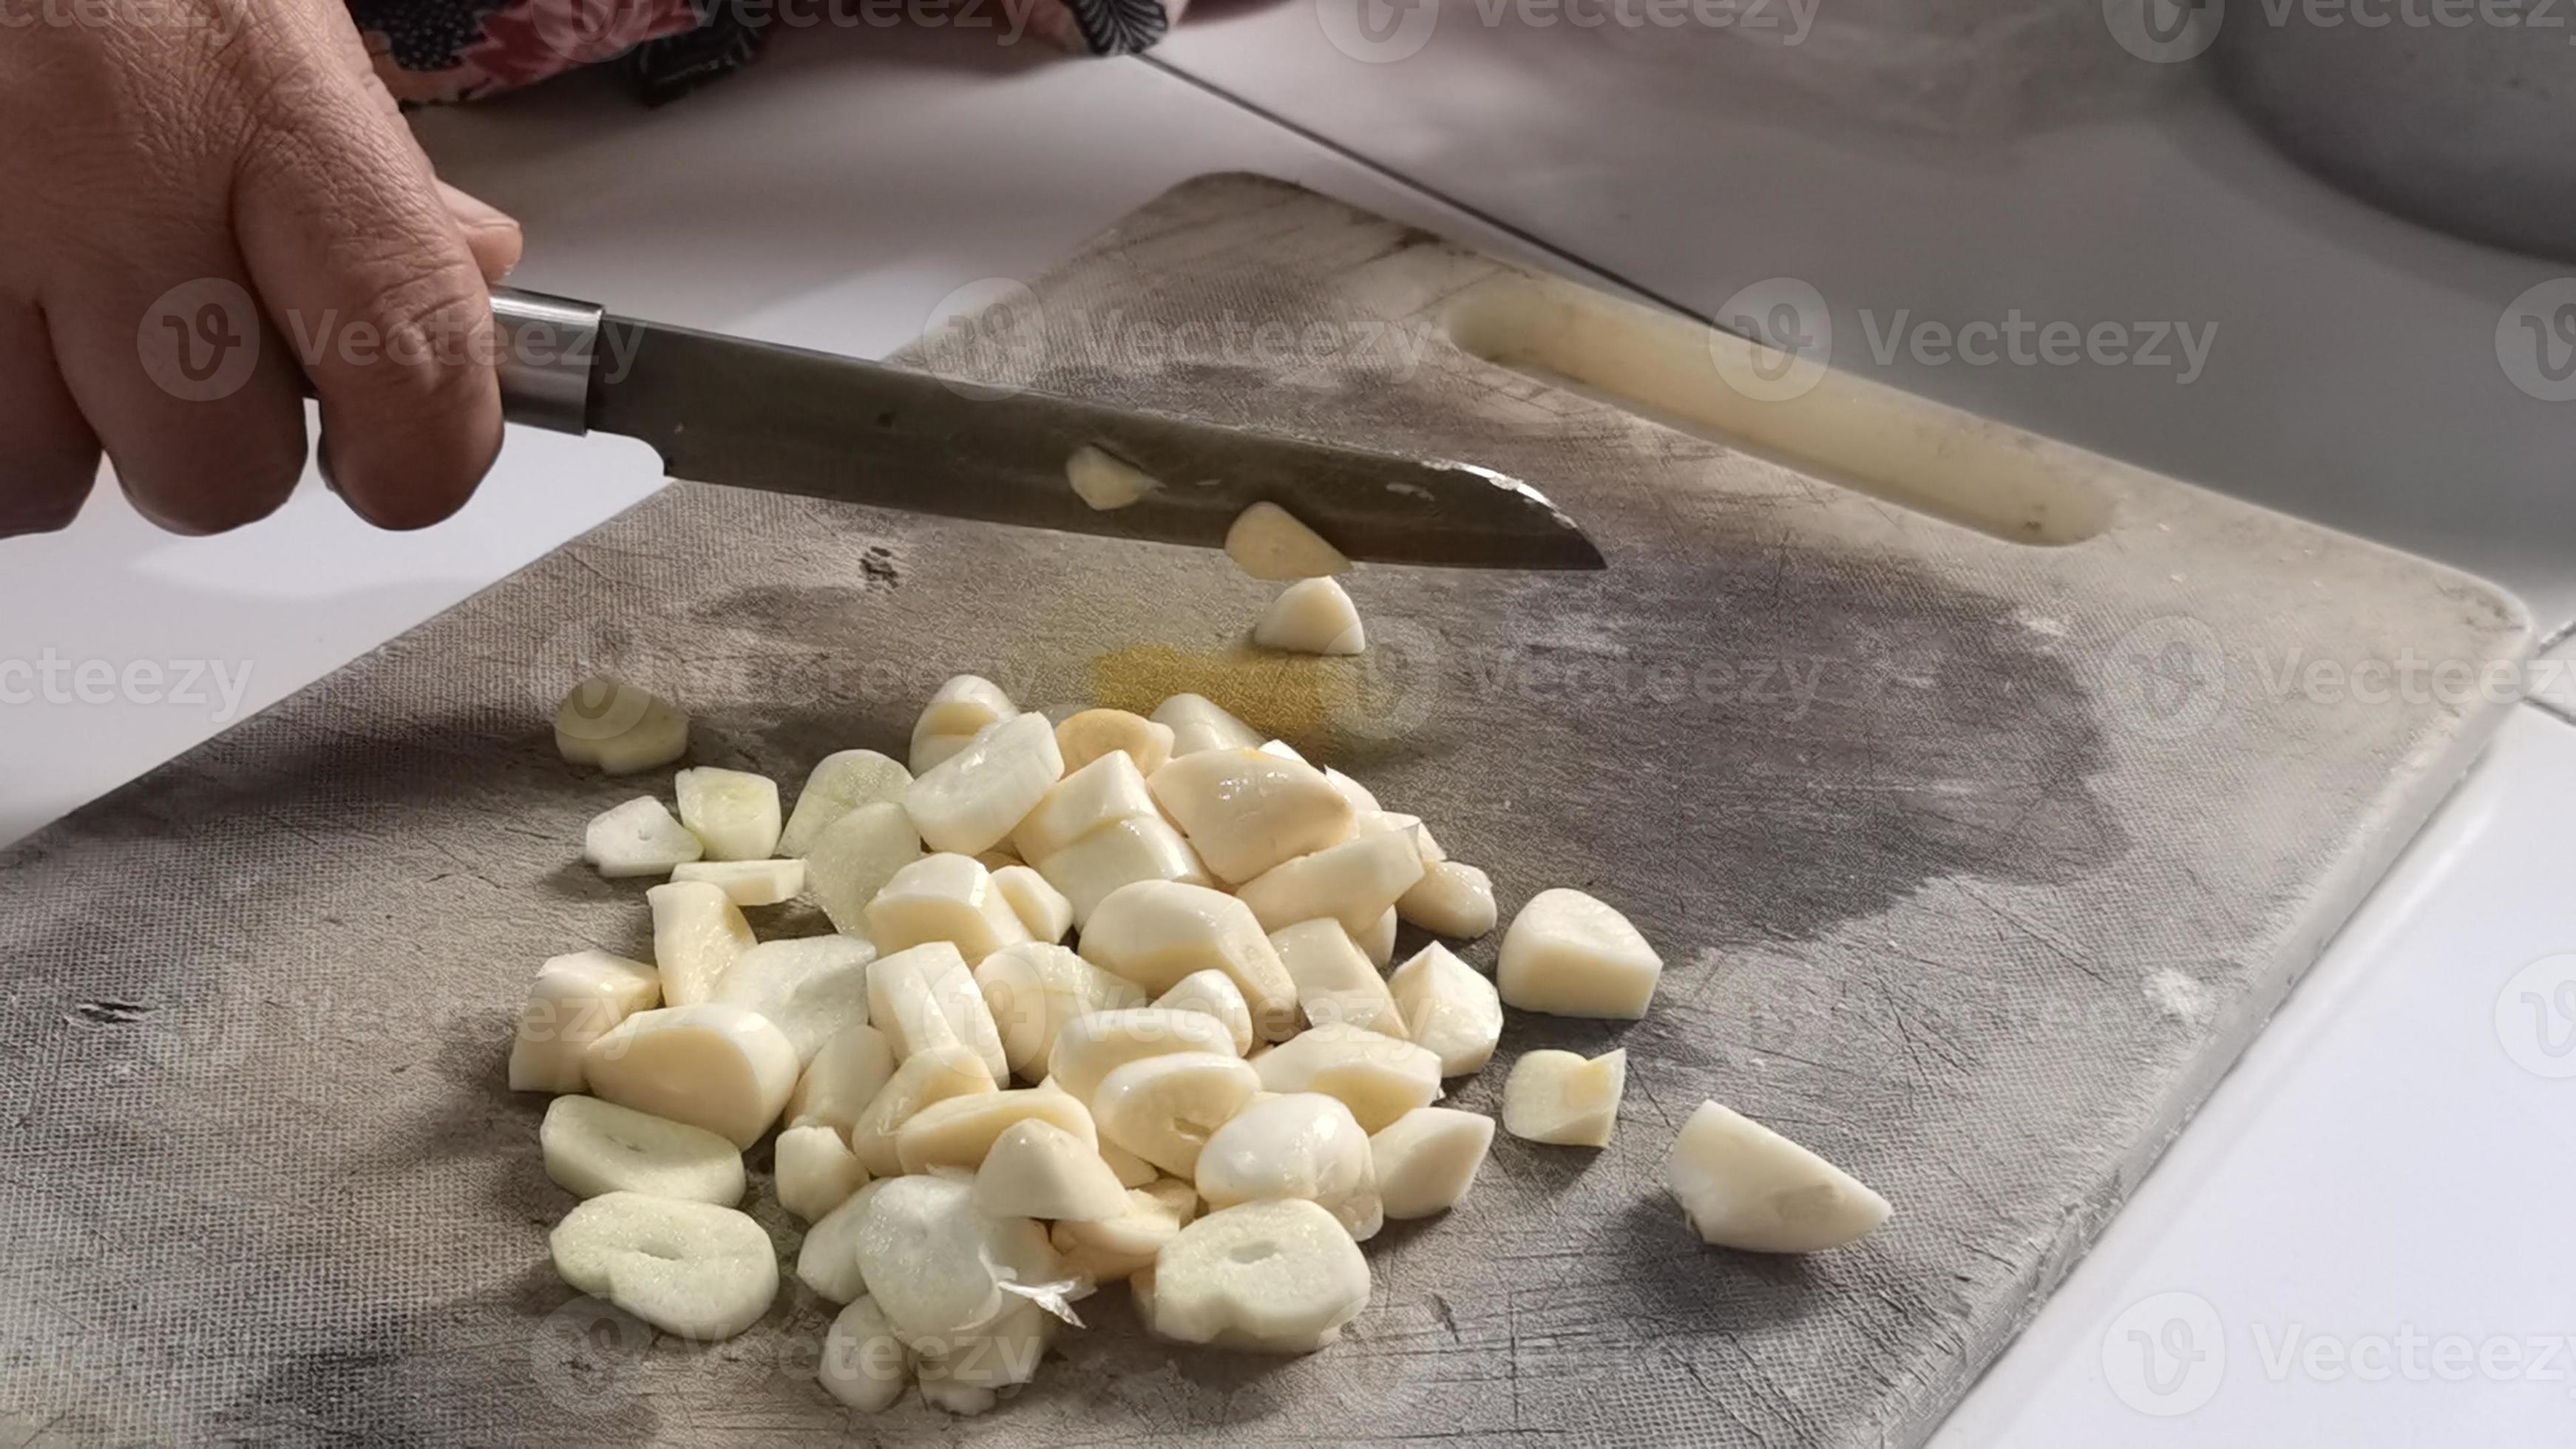 https://static.vecteezy.com/system/resources/previews/008/114/640/large_2x/the-cook-cutting-and-dice-garlic-on-a-cutting-board-photo.jpg